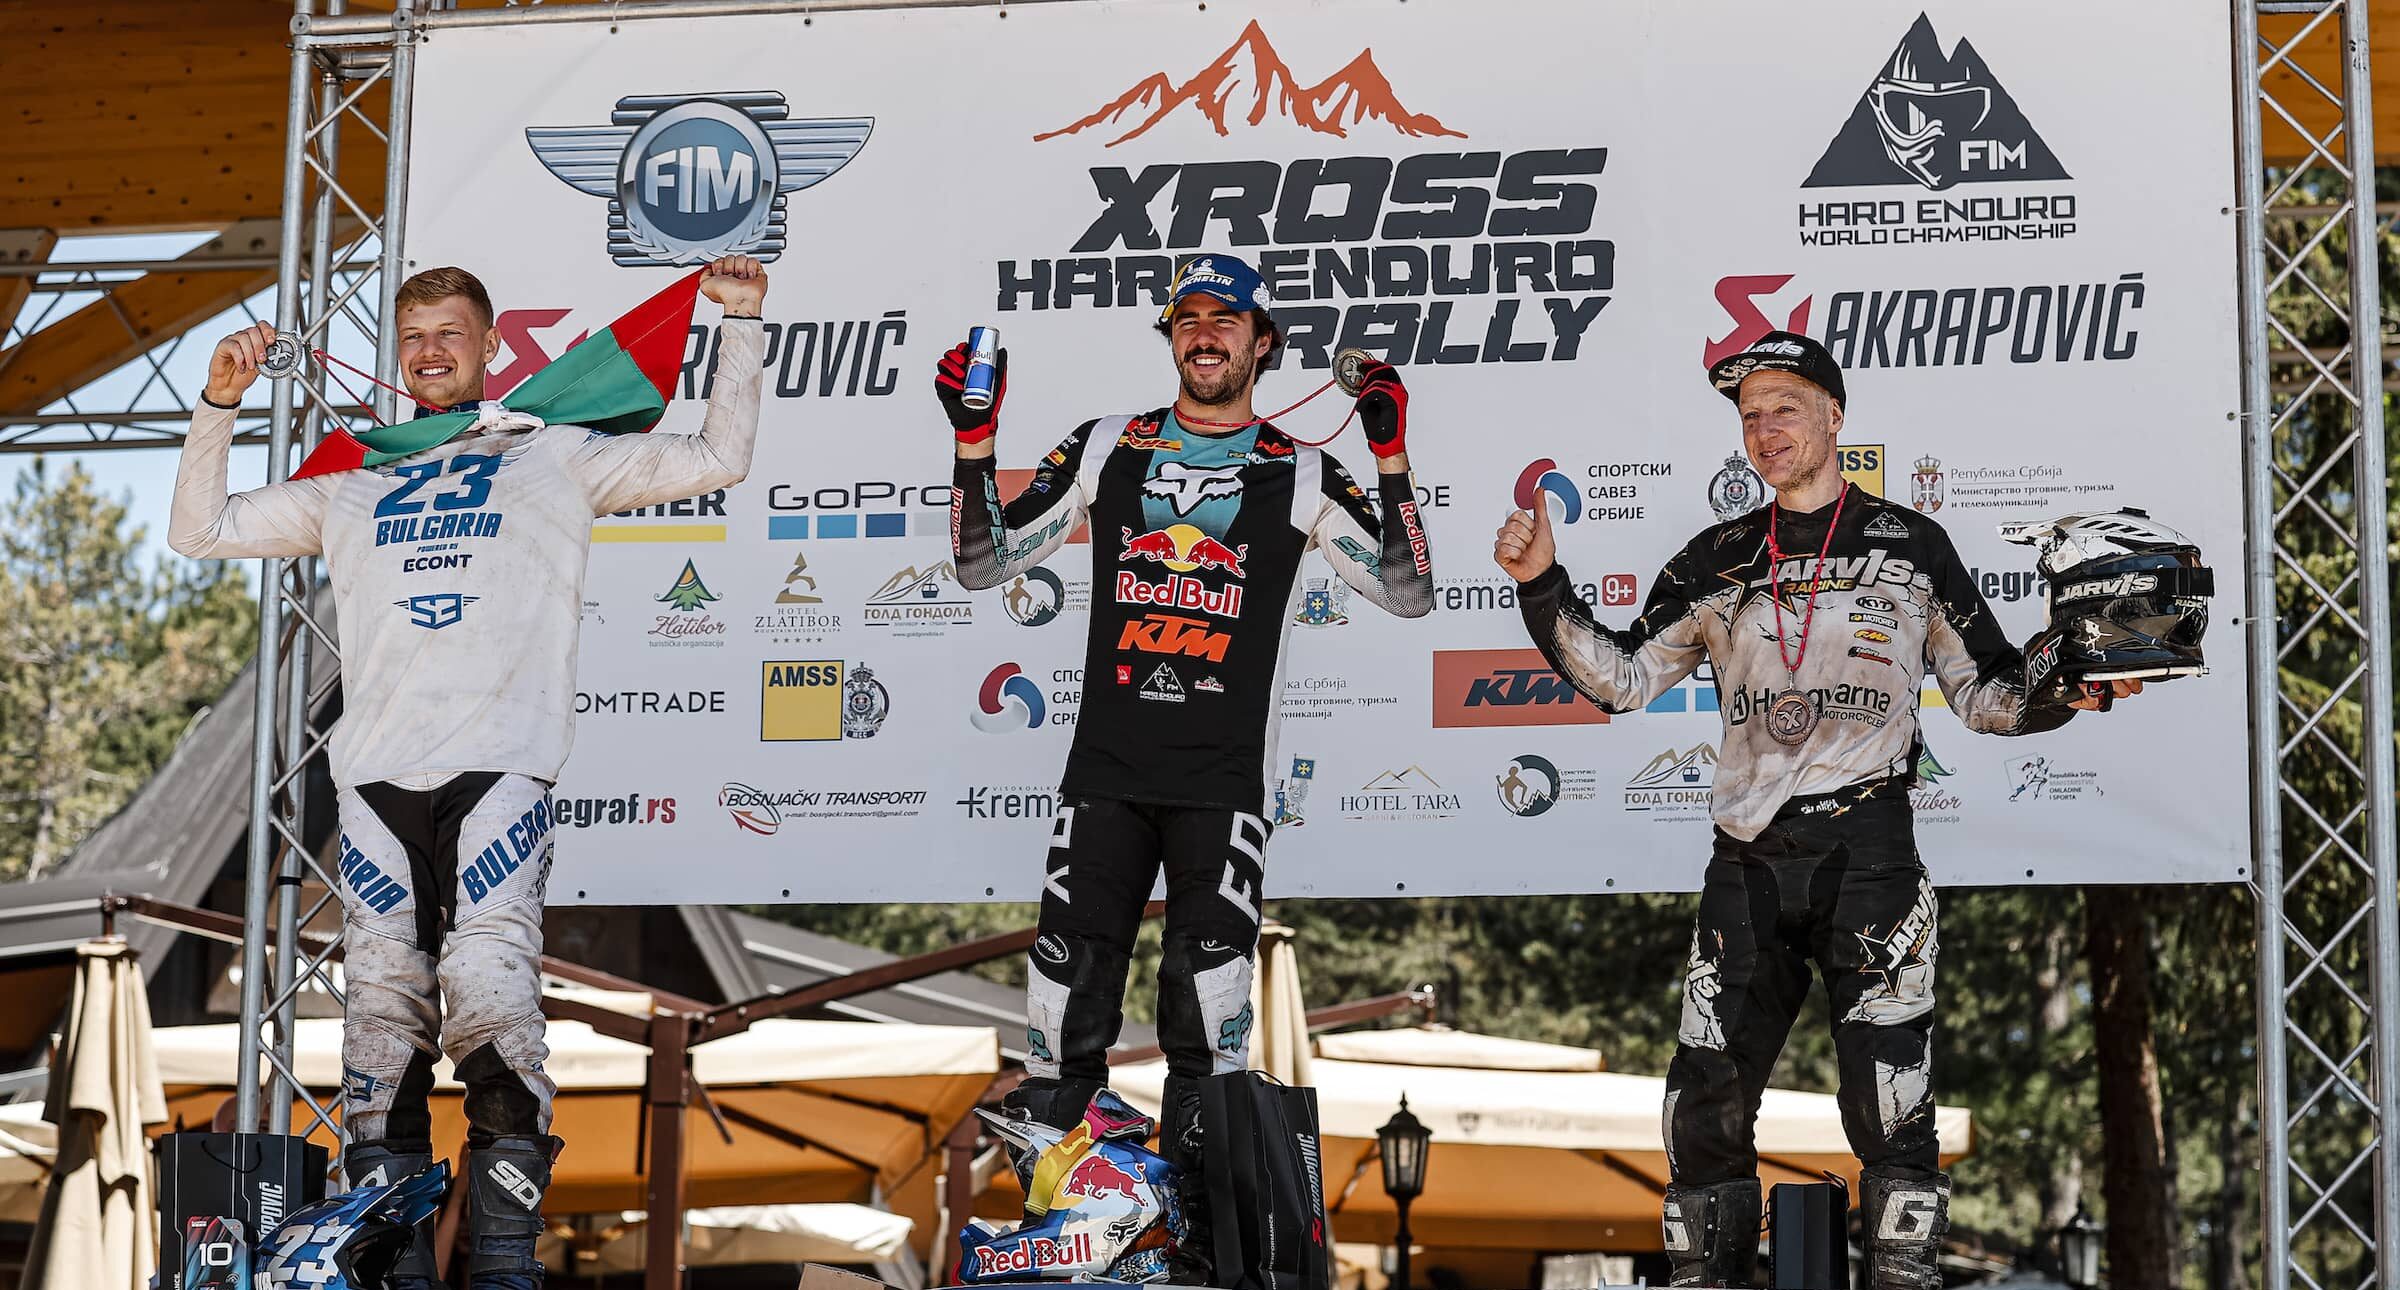 Manuel Lettenbichler Back From Injury With Xross Hard Enduro Rally Victory